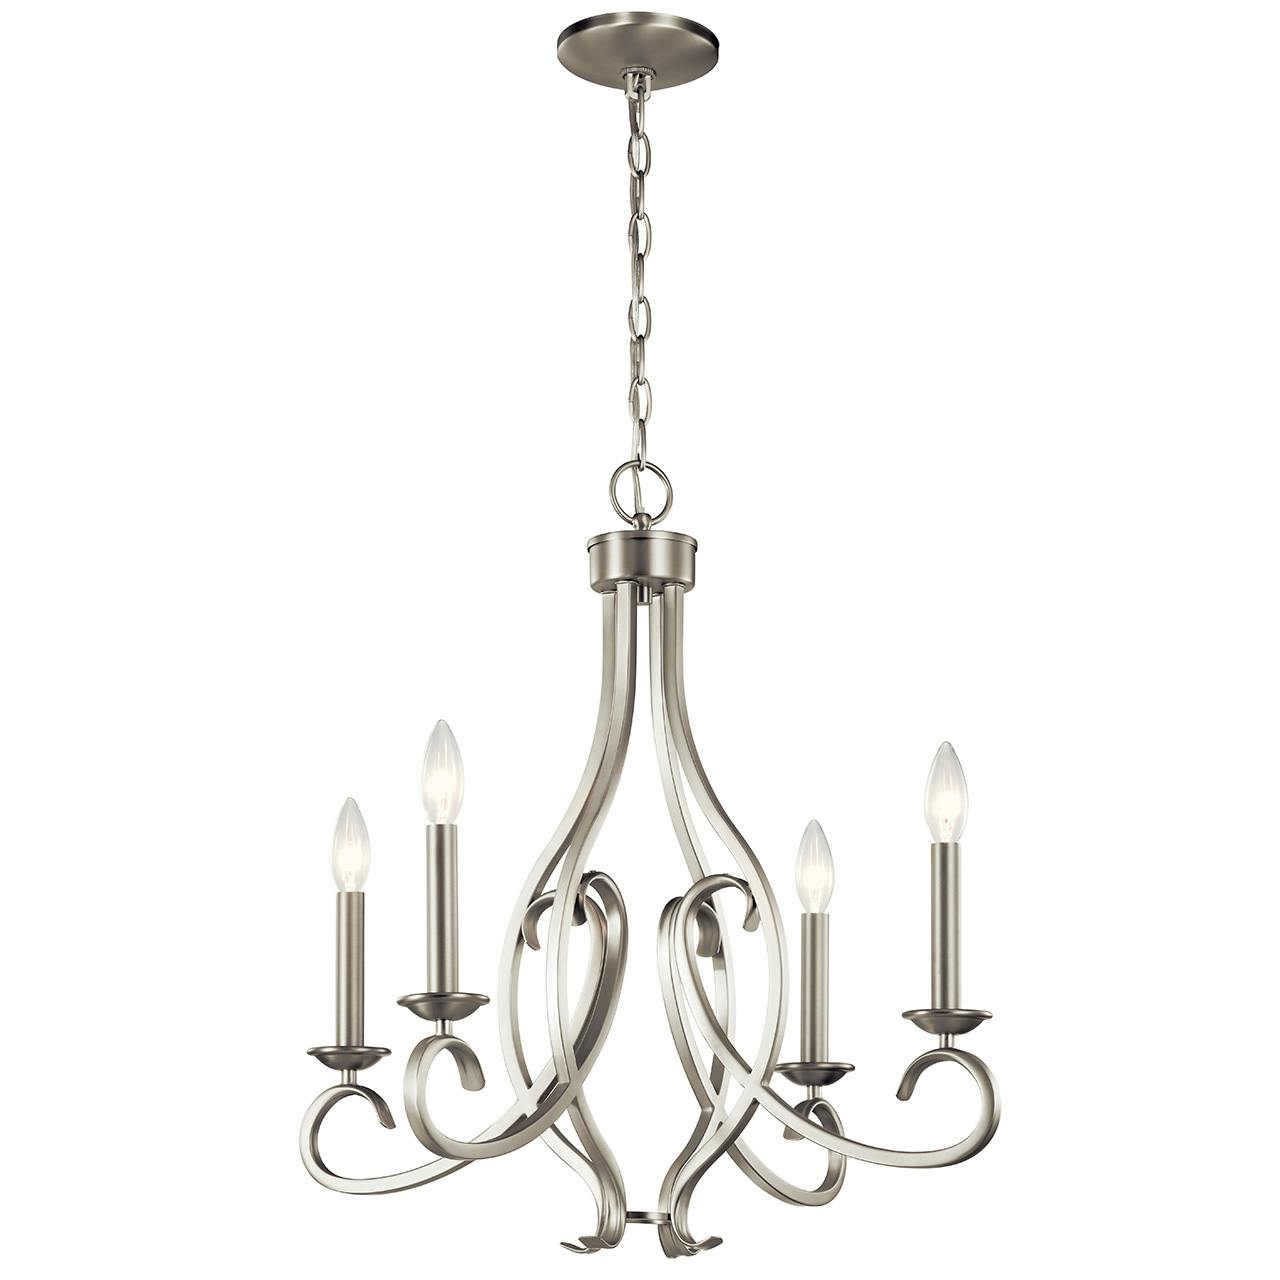 Ania 4 Light Chandelier Brushed Nickel on a white background